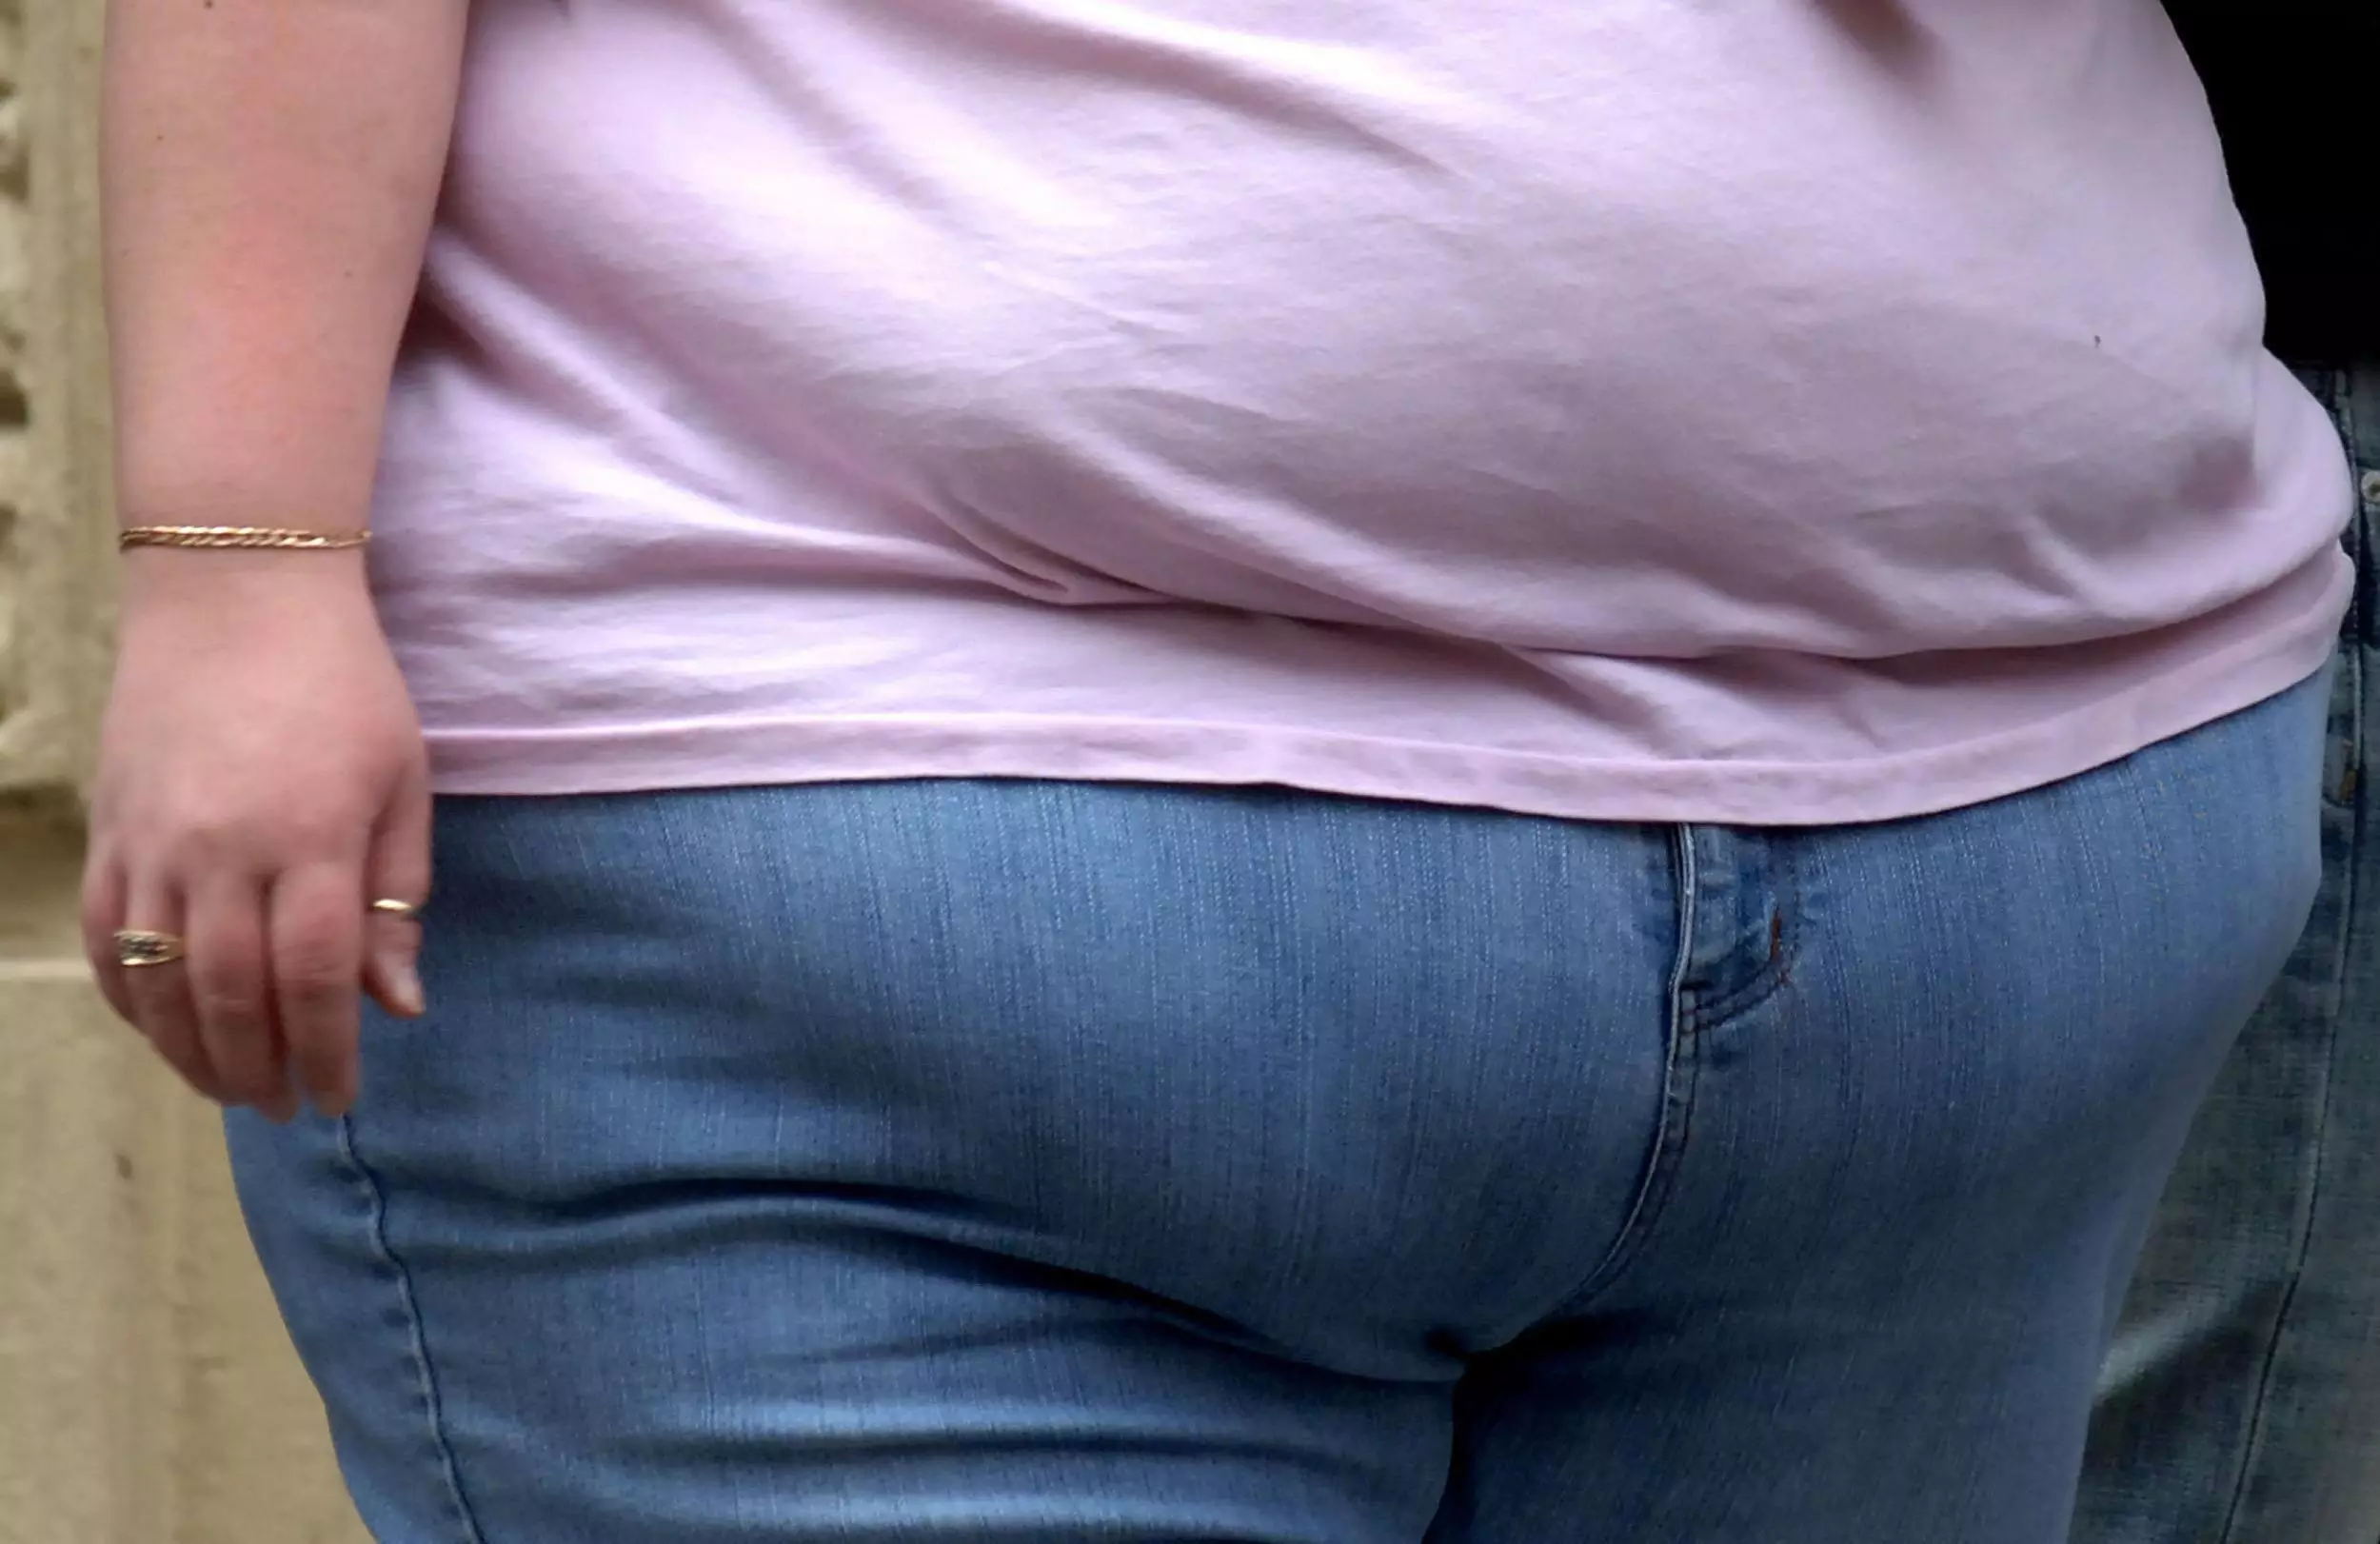 Buerk says that obese people dying early would be making a 'selfless sacrifice'.